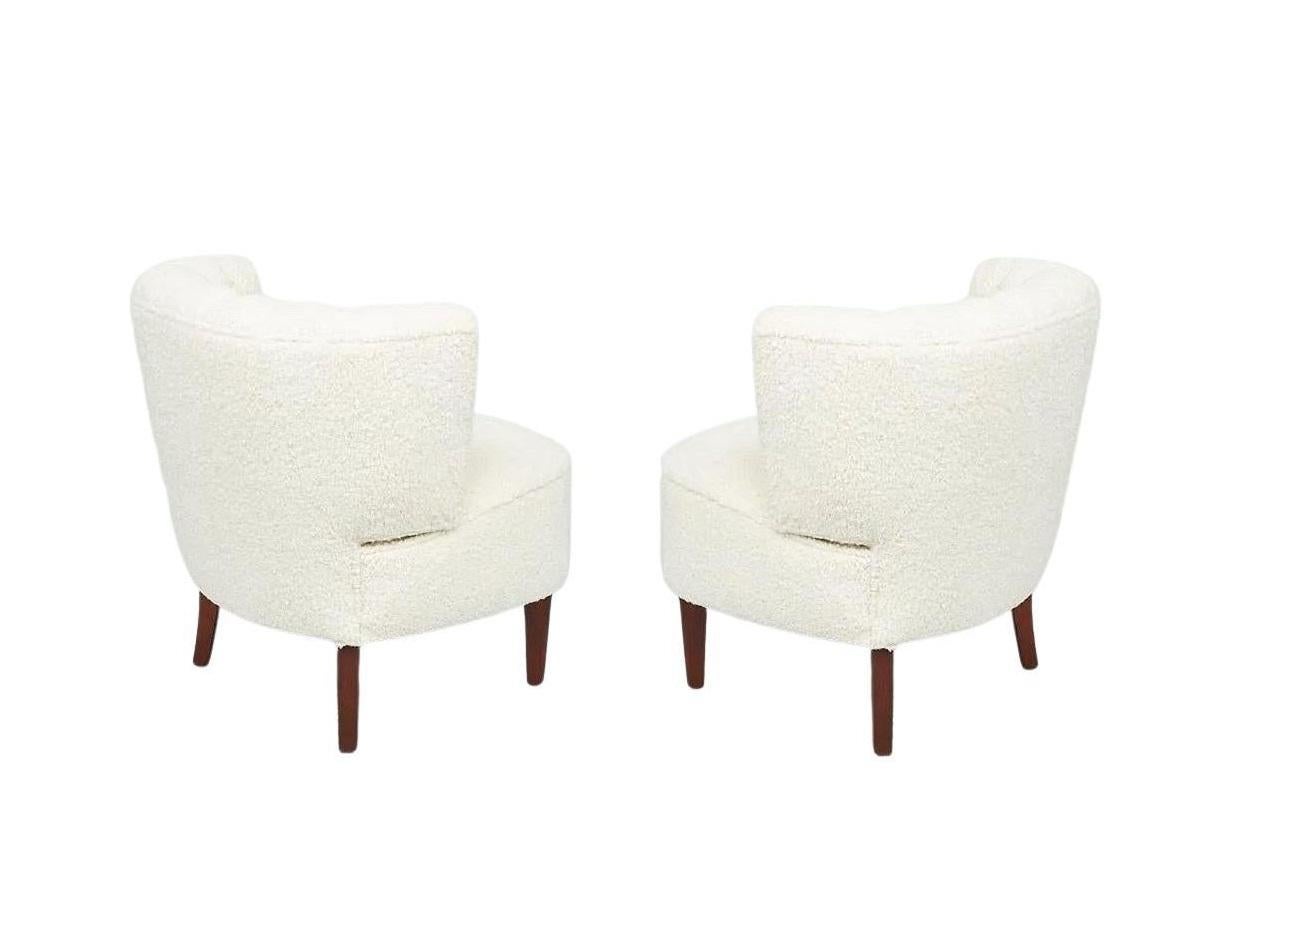 Mid-Century Otto Schultz Lounge Chairs in Bouclé, Sweden, ca 1950s For Sale 5